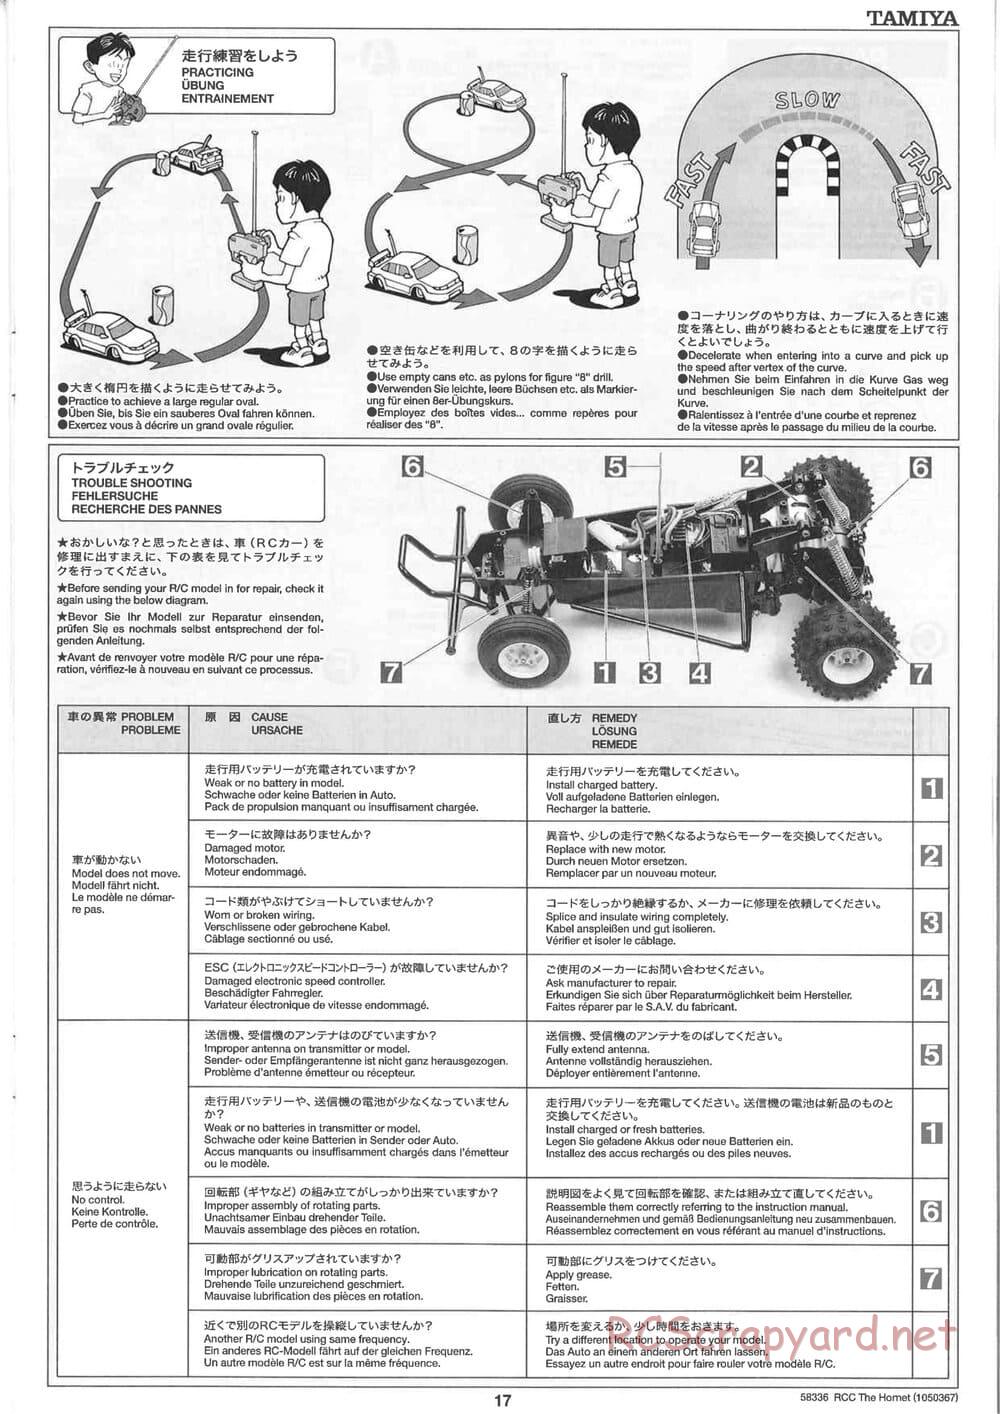 Tamiya - The Hornet (2004) - GH Chassis - Manual - Page 17